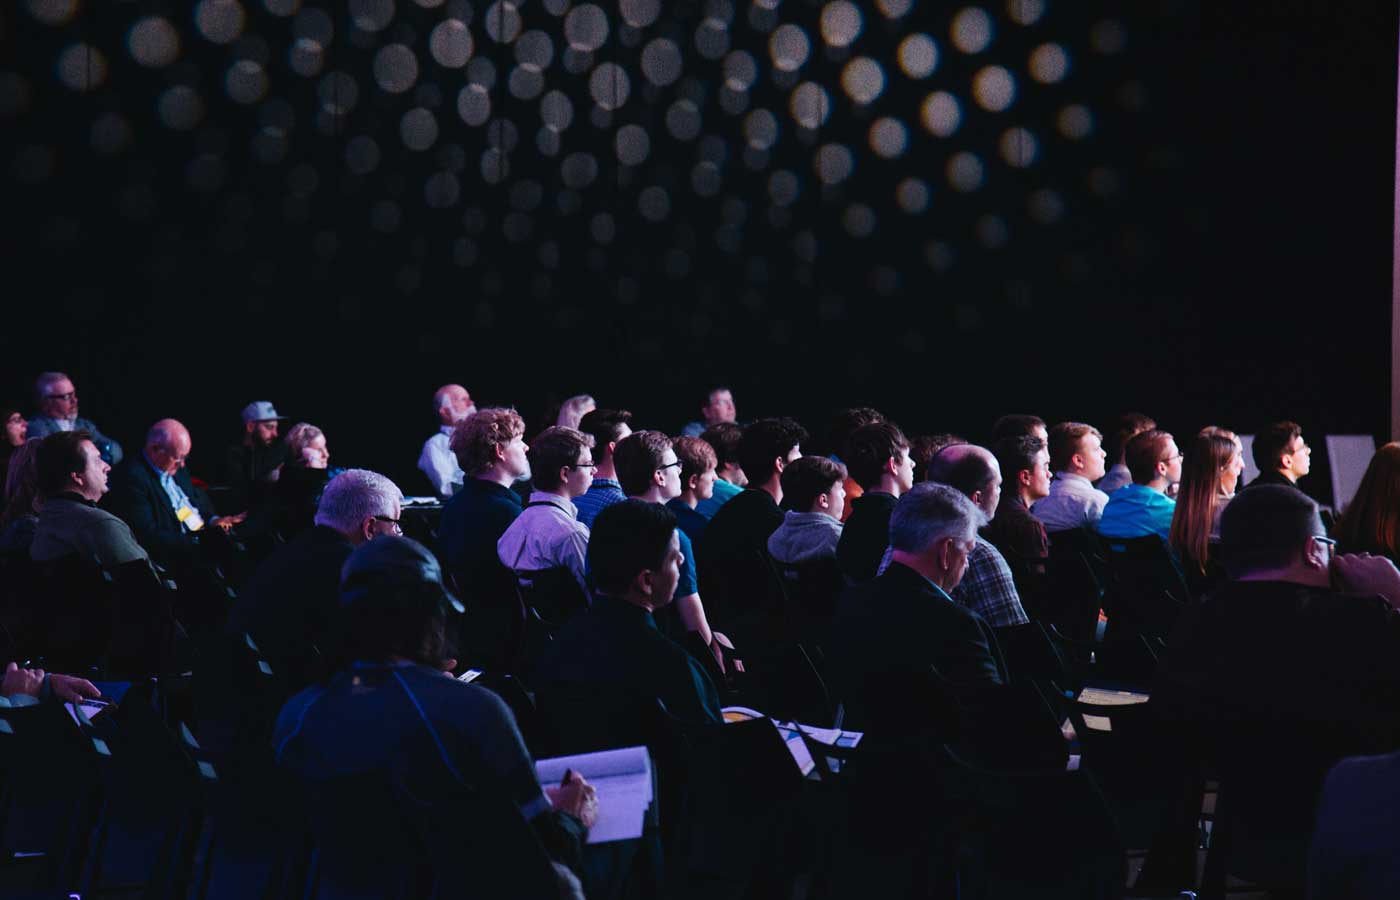 Planning a corporate event - Shows an audience watching a seminar